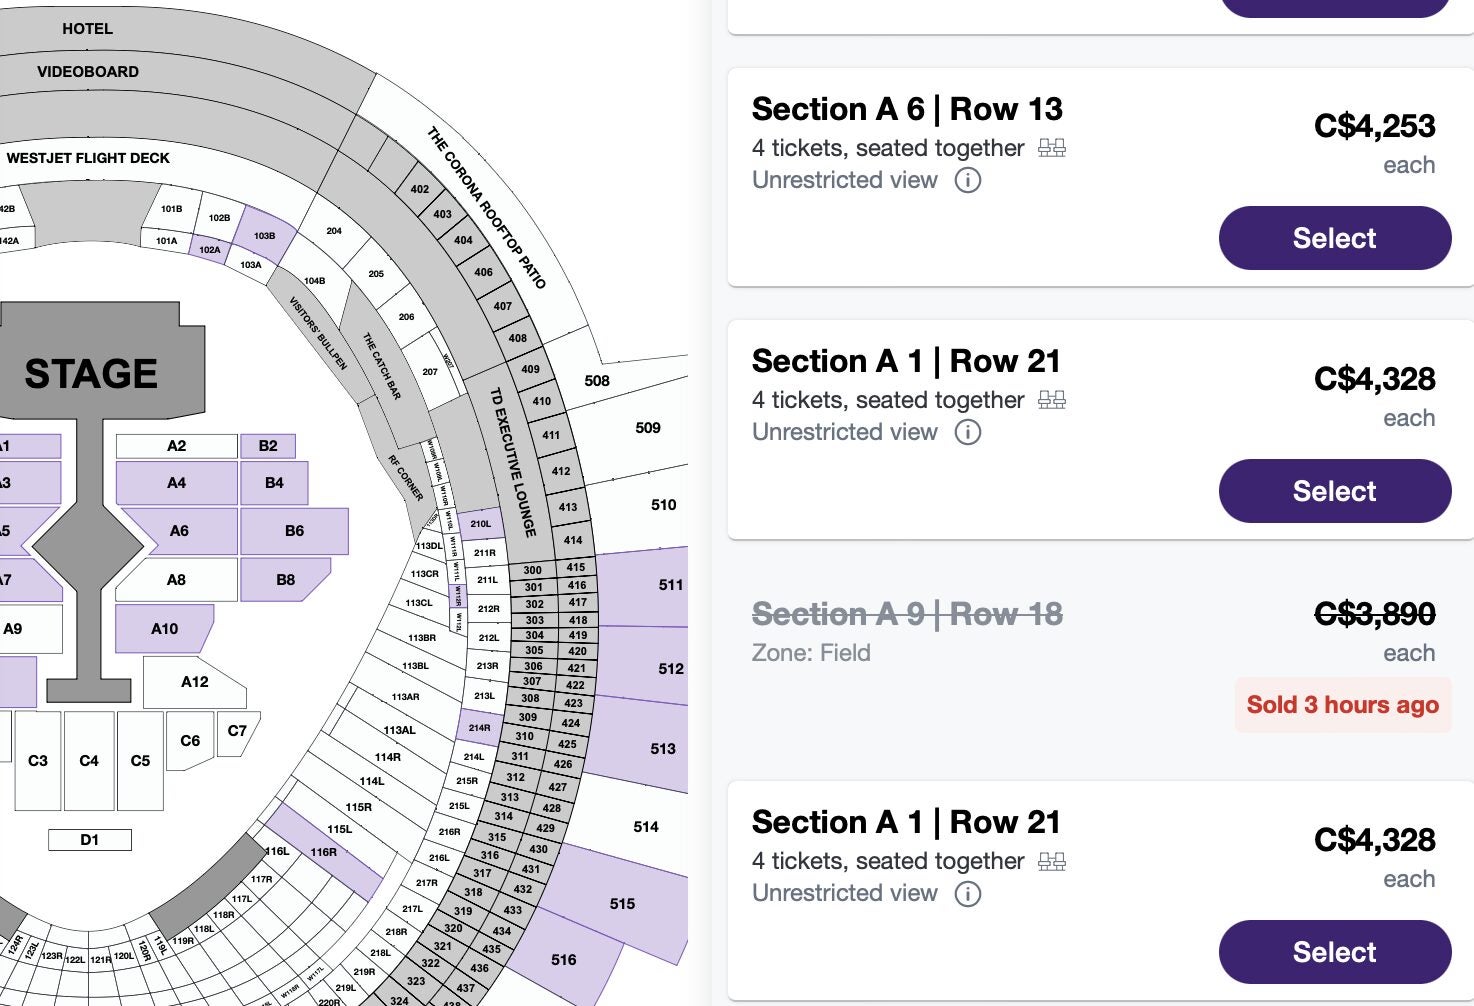 Rogers Centre seating map is up!! : r/TaylorSwift